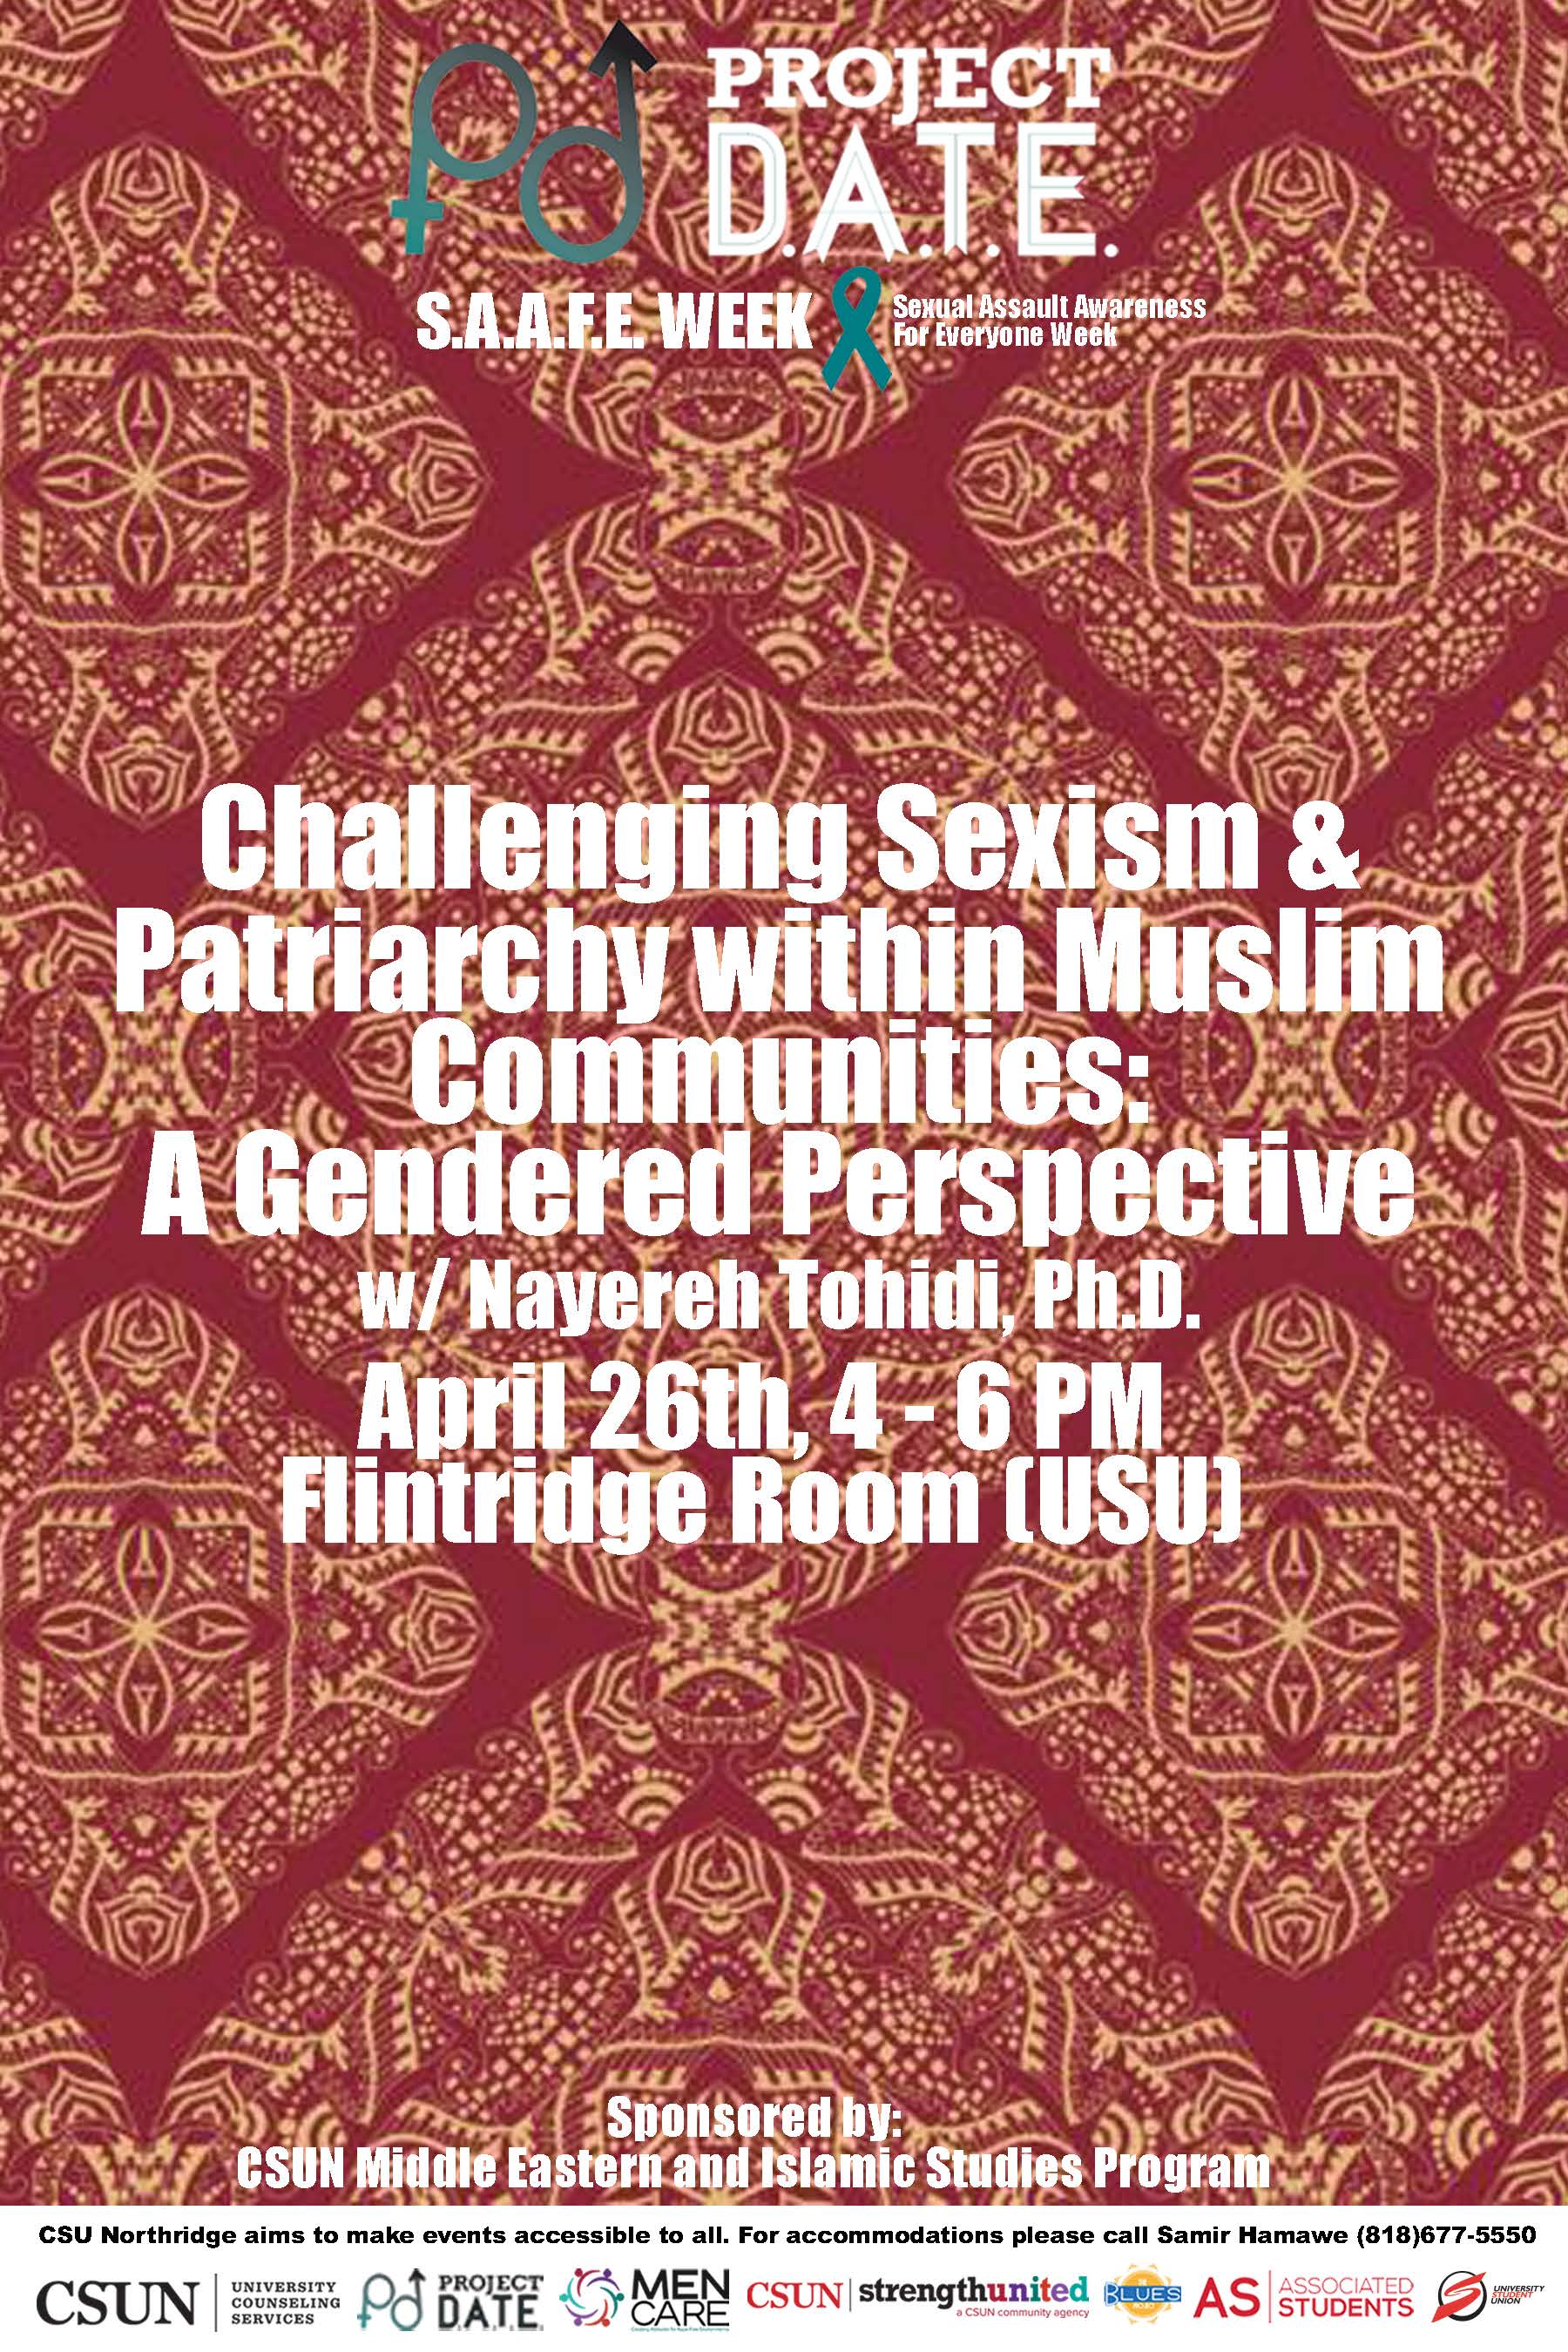 Challenging Sexism & Patriarchy within Muslim Communities: A Gendered Perspective